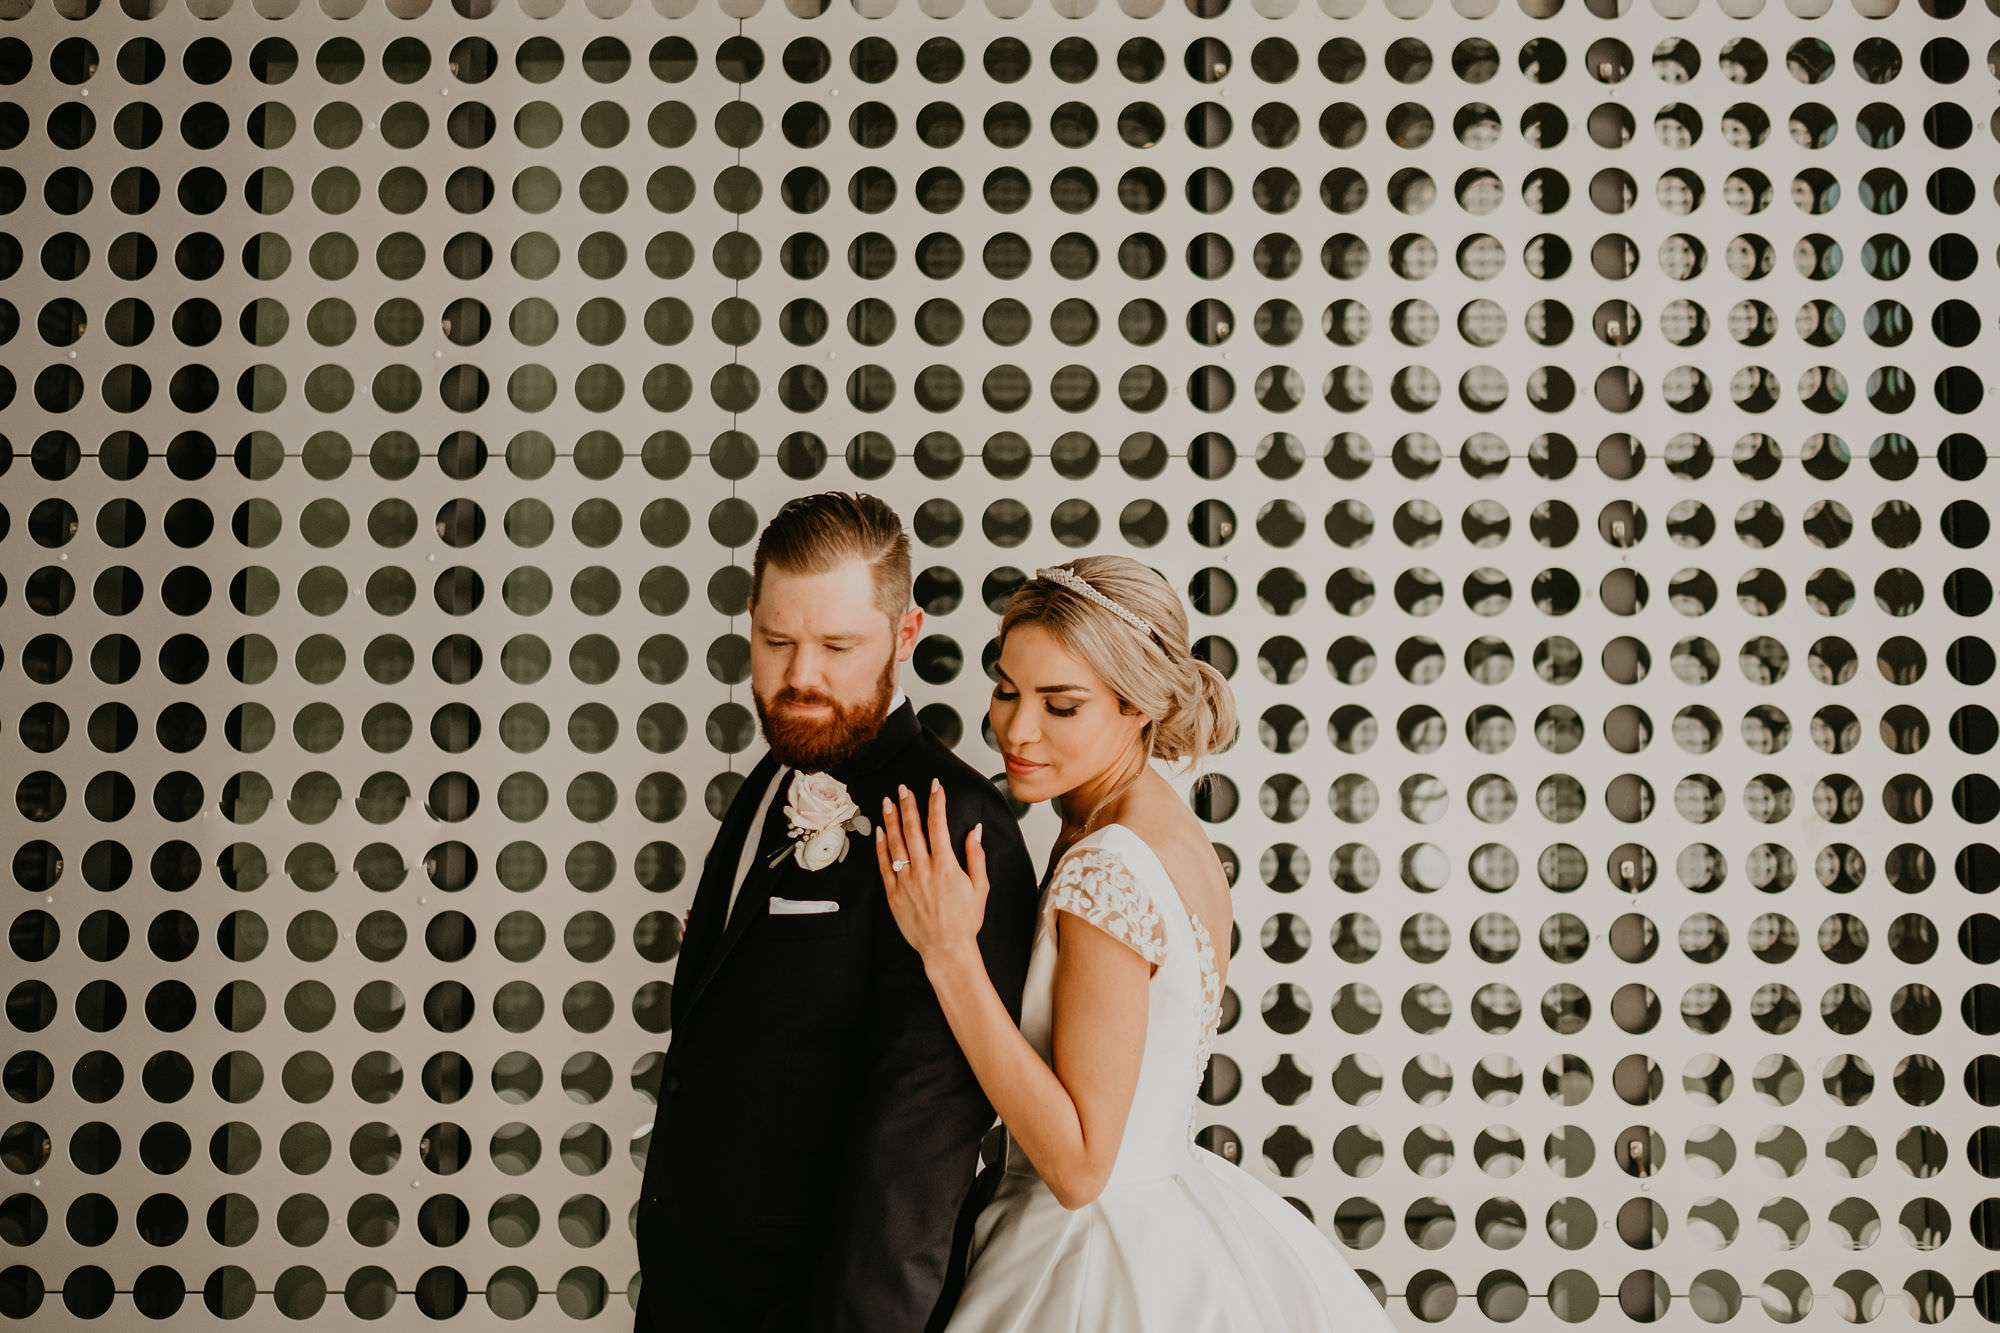 Bride and Groom Portrait with Polka Dots Pattern Wall Backdrop | Groom in Classic Black Suit Tux | Low Back Ballgown Wedding Dress by Anomalie